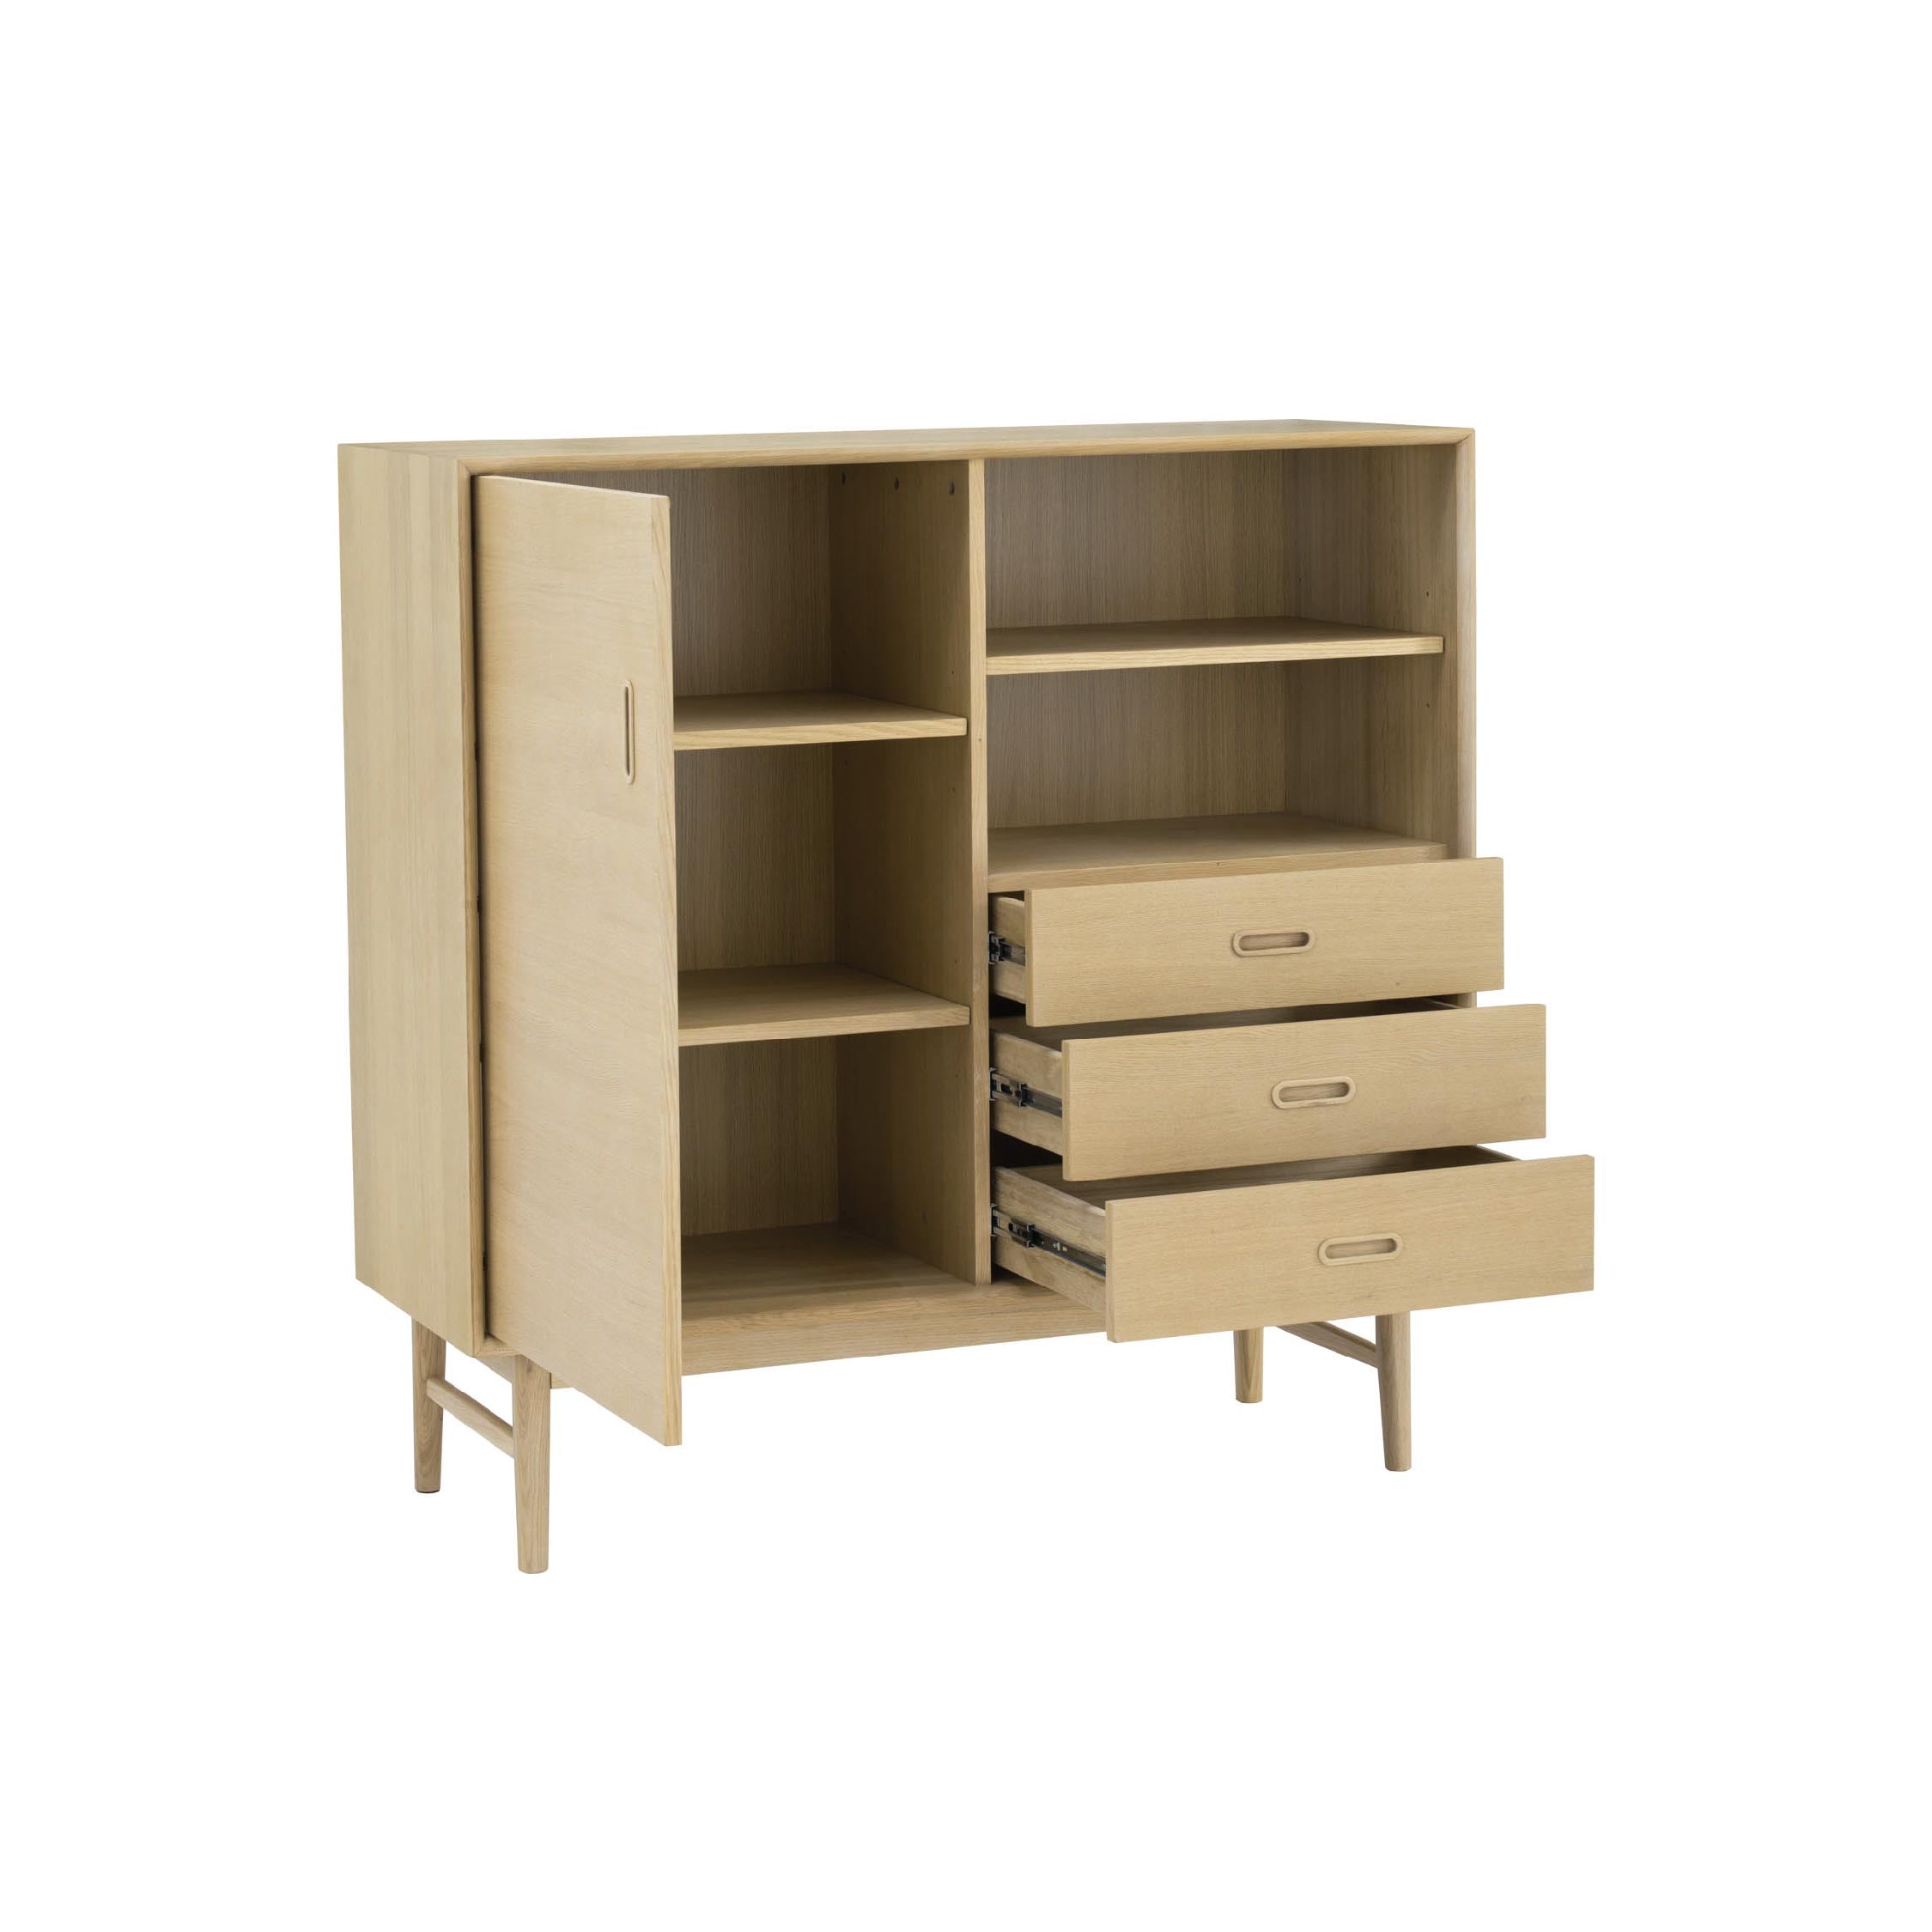 SOLID Tall Sideboard 1.6m